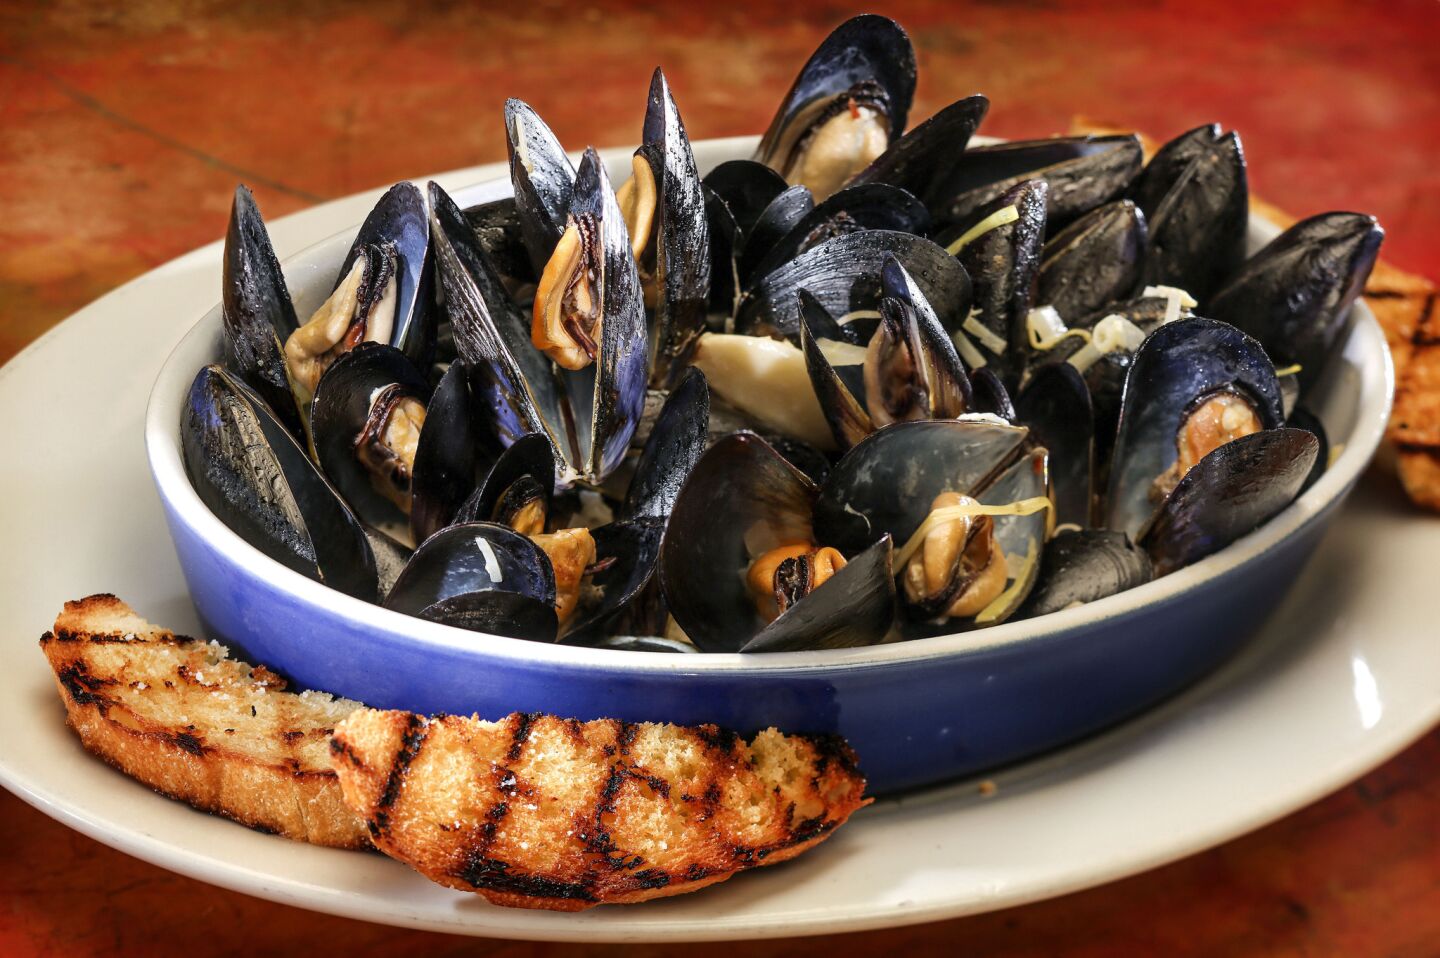 Mussels are steamed in a flavorful blend of fresh fennel, garlic, leeks, cream and white sambuca, the anise-flavored Italian liqueur. Recipe: Giuseppe's mussels in sambuca